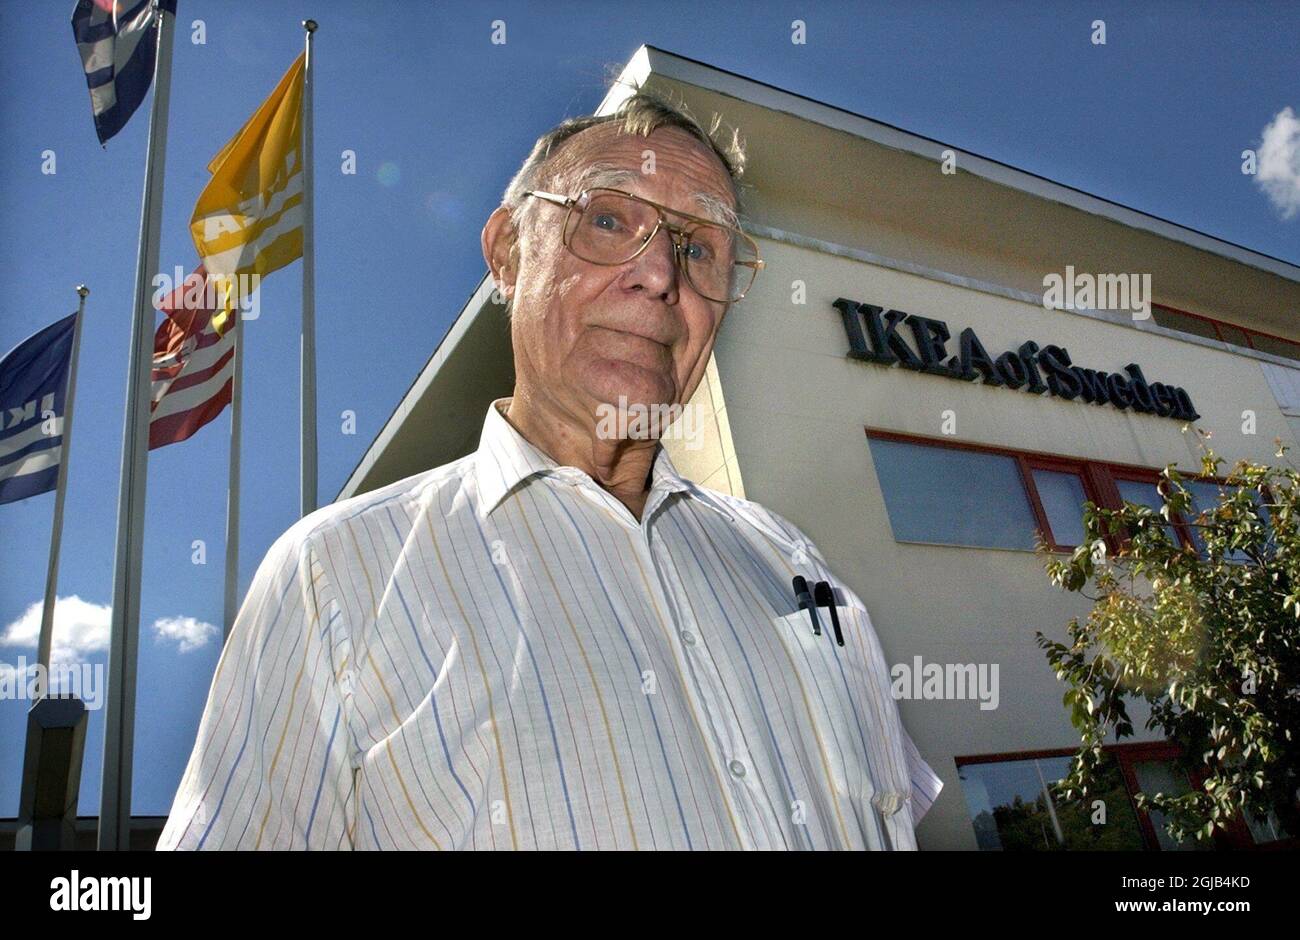 The owner and founder of the Swedish furniture manufacturer, Ingvar Kamprad  76, will soon retire and leave the company to his three sons, Kamprad said  in a rare interwiew in the Financial